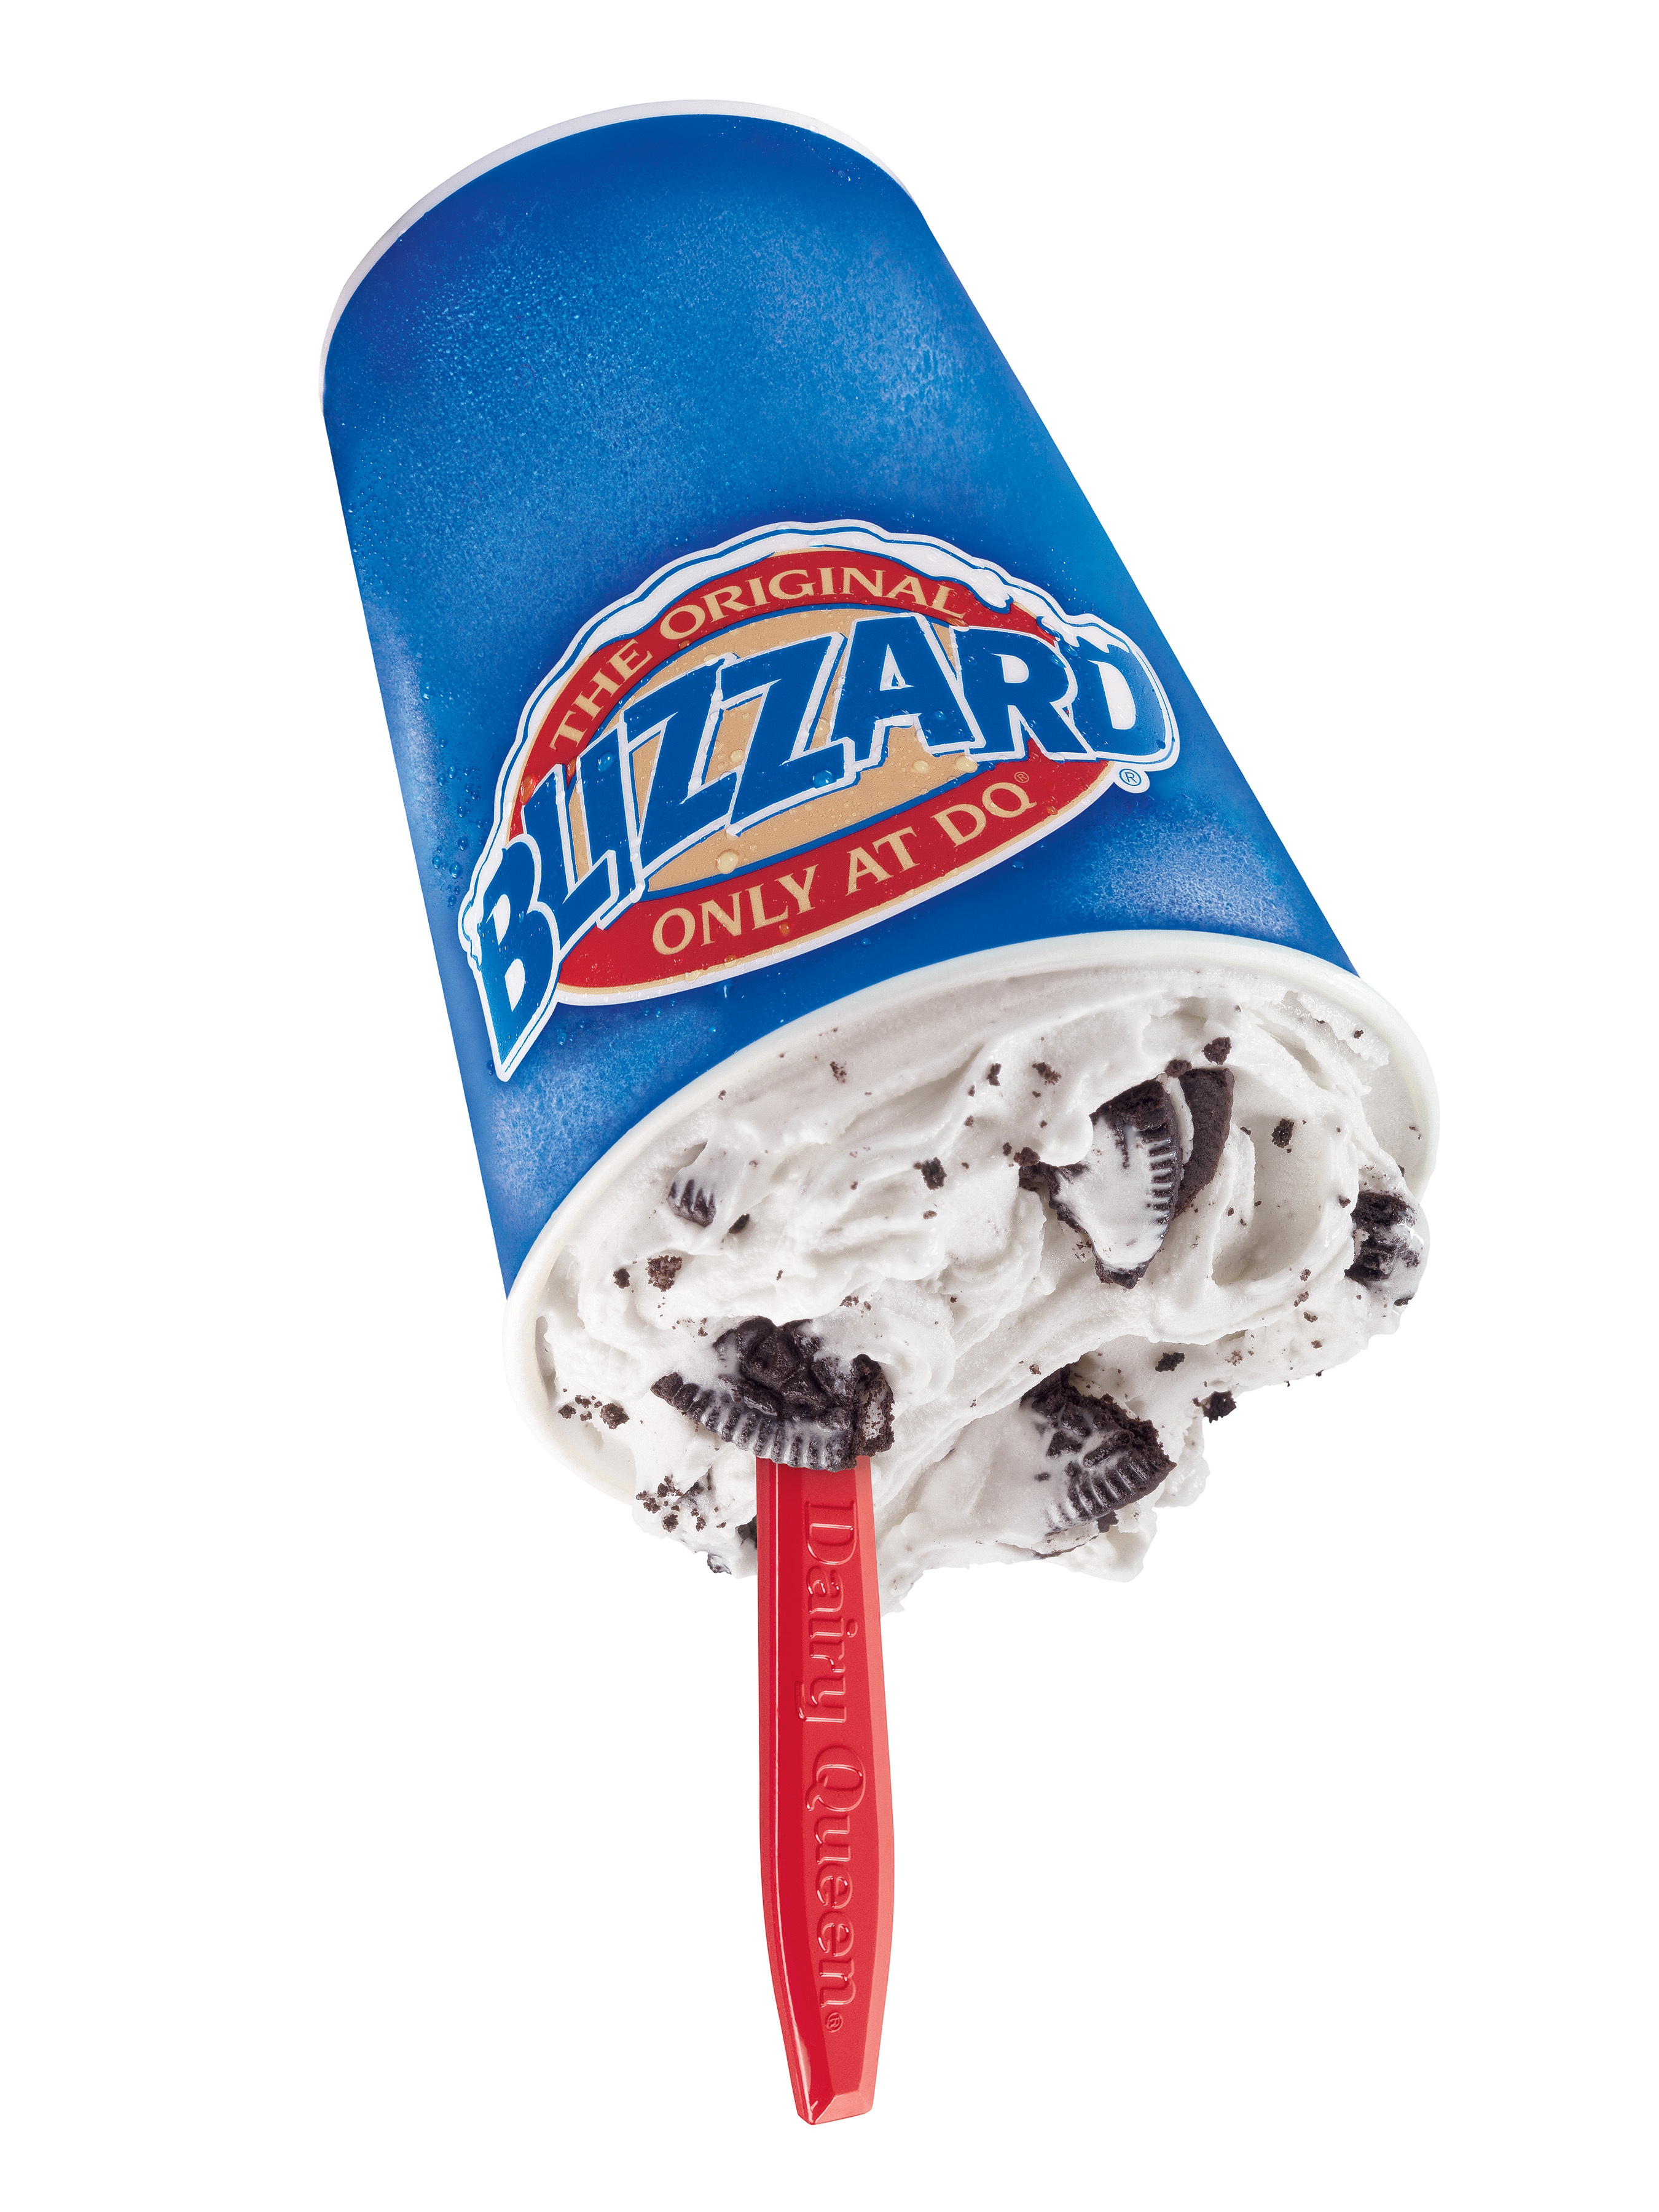 The Dairy Queen® System Iconic Blizzard® Treat Takes Center Stage on